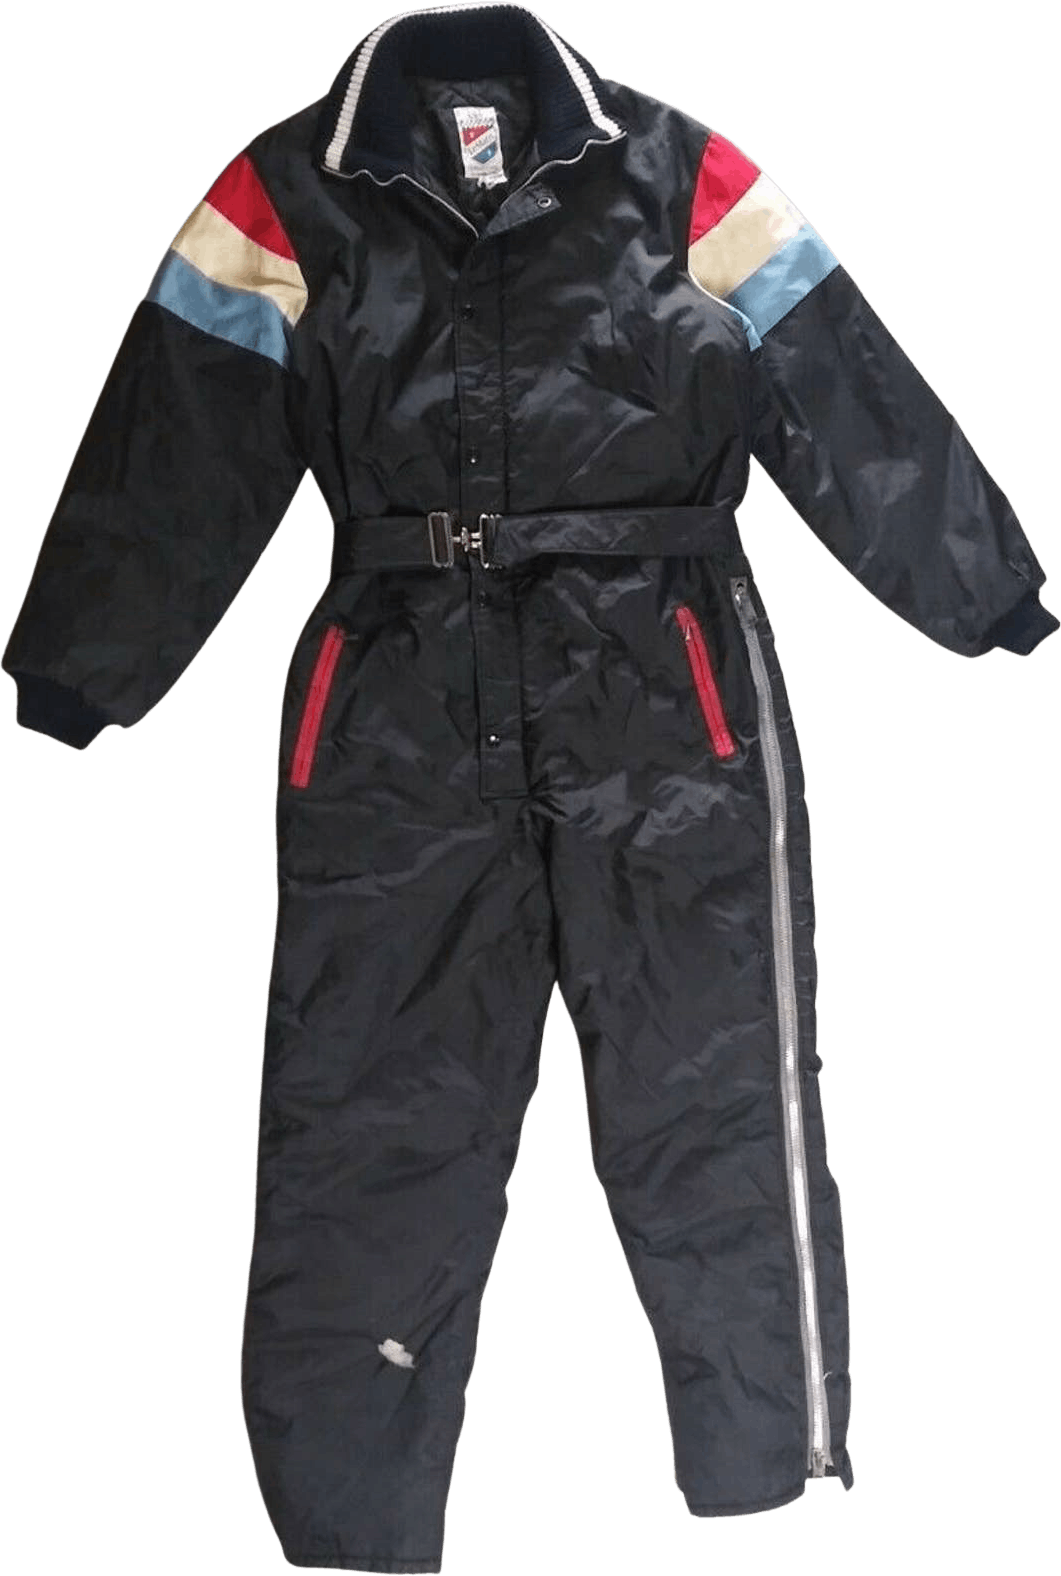 Vintage 60’s Black Full Body Insulated Snow Racing Suit by Le Mans ...